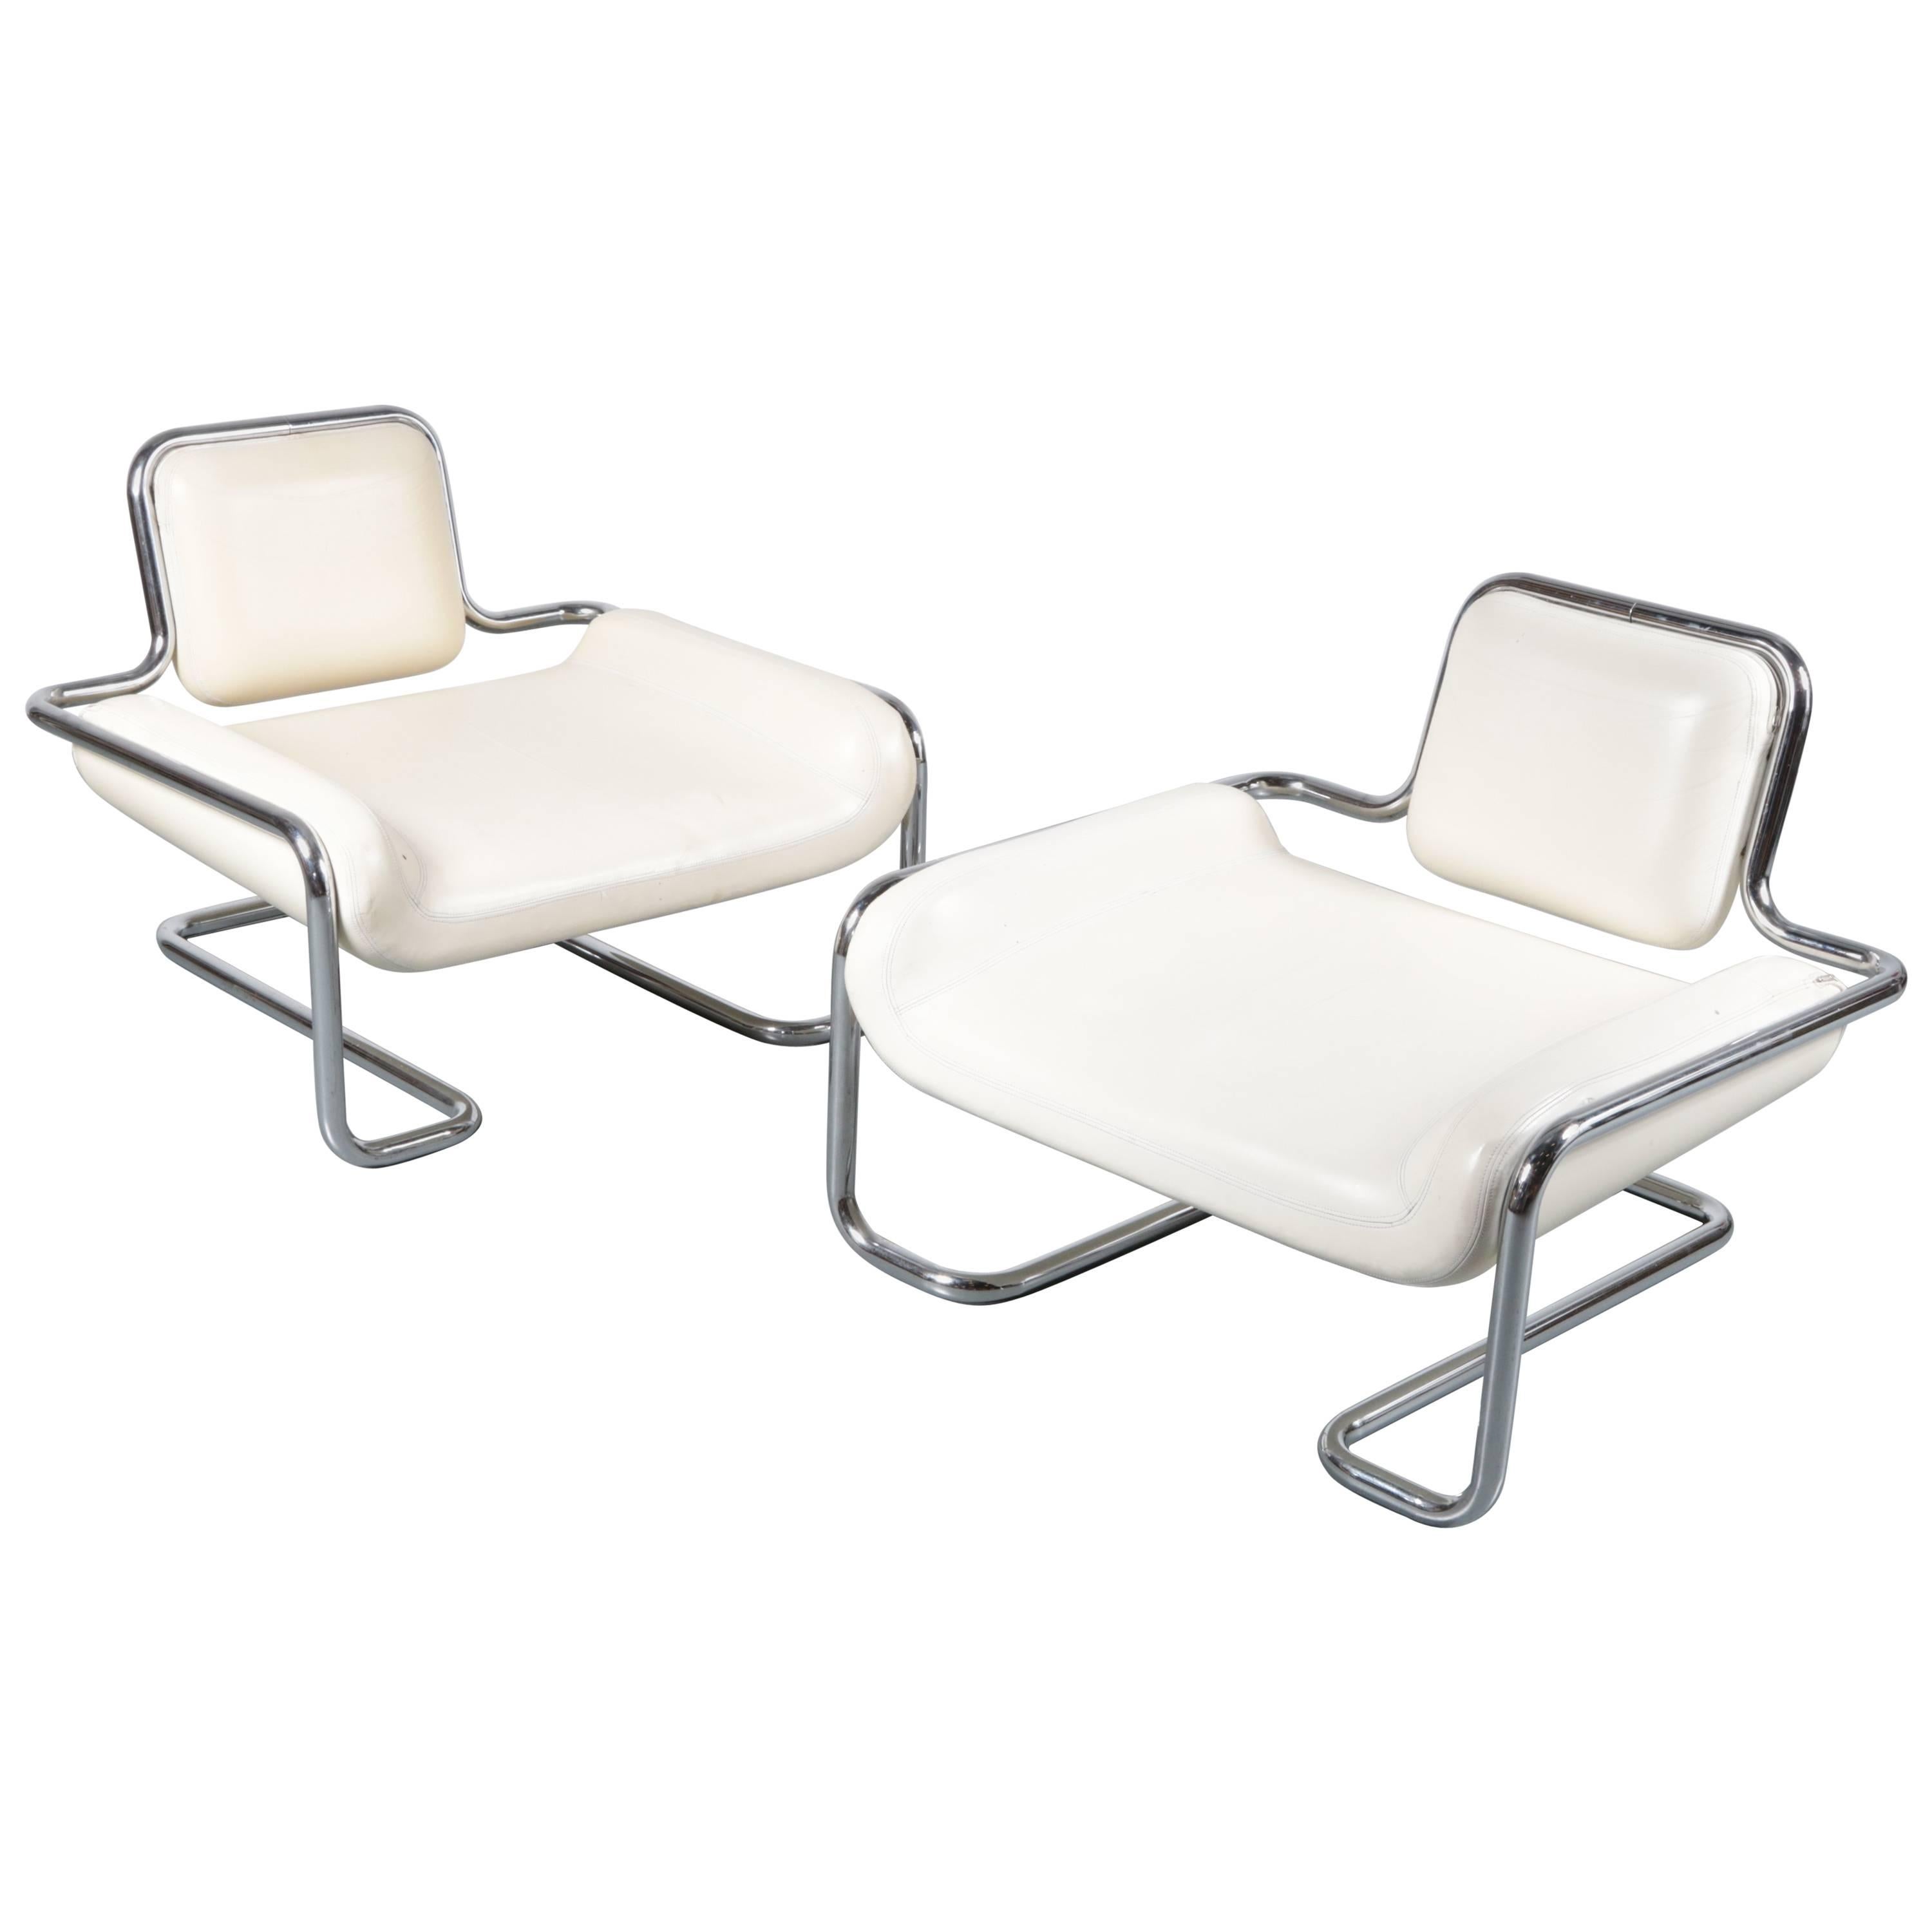 Pair of Limande Chairs by Kwok Hoï Chan for Steiner in France, 1971